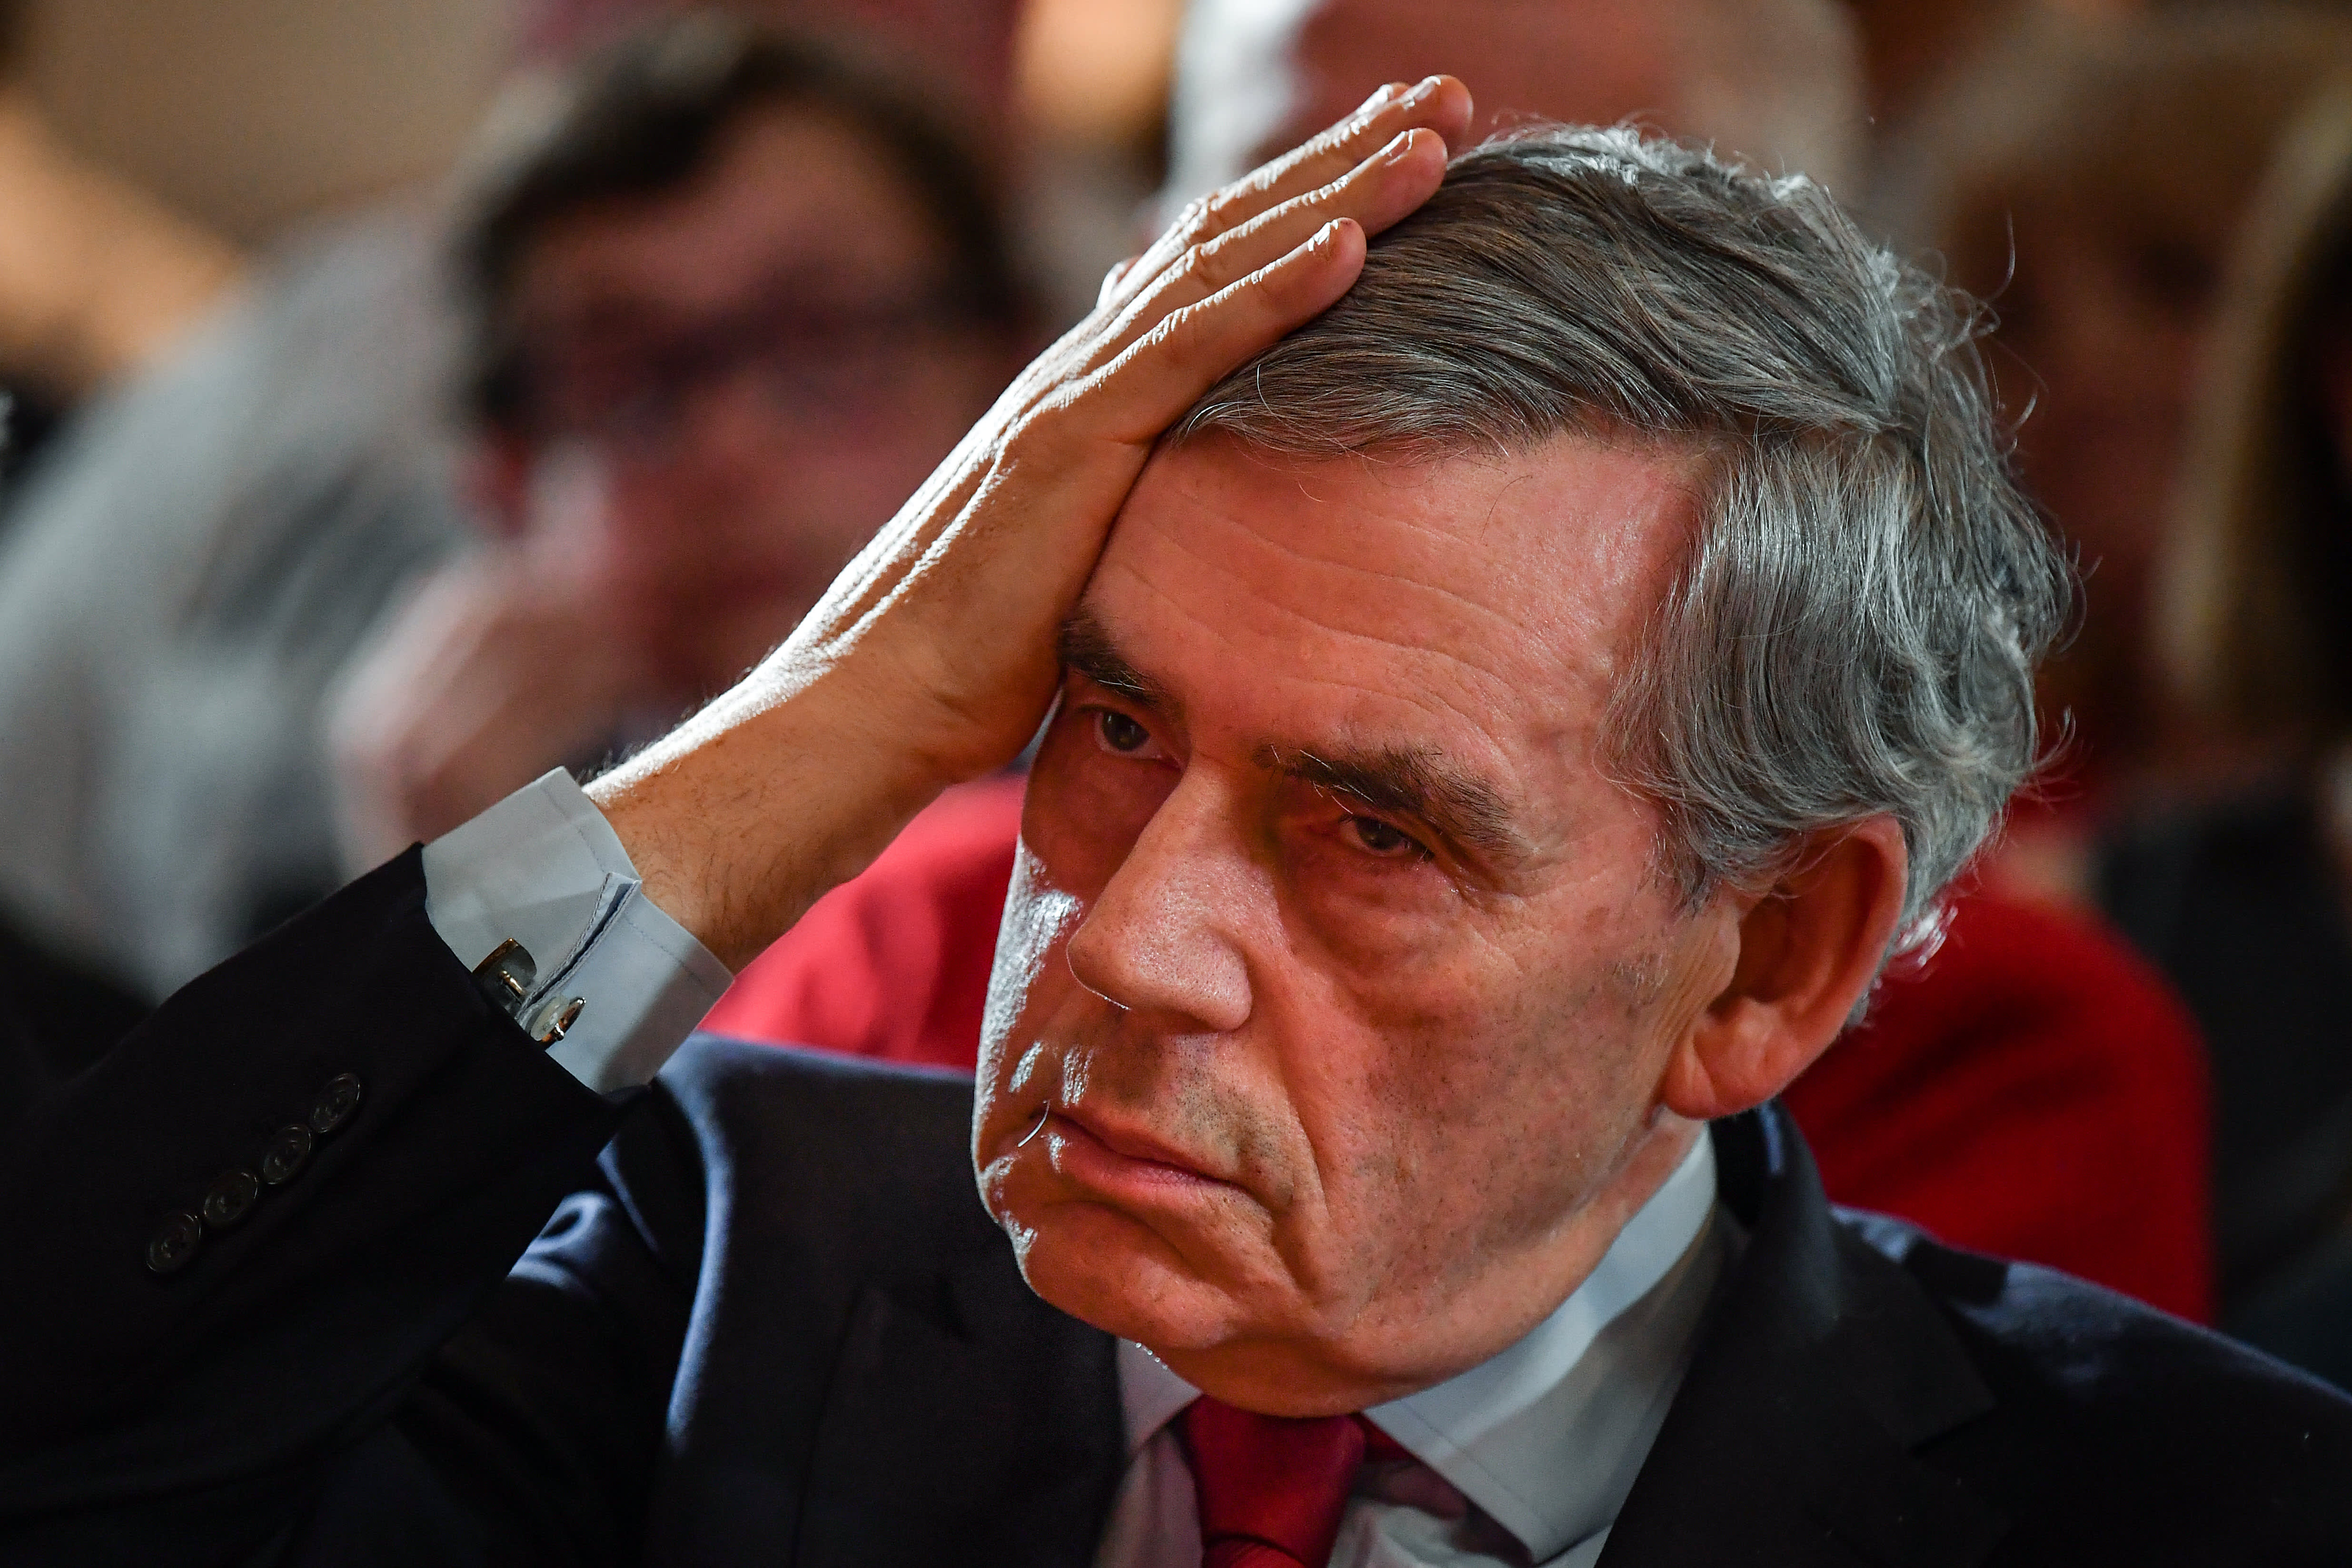 Britain's efforts to become a global power are mired in scandal, says former PM Gordon Brown